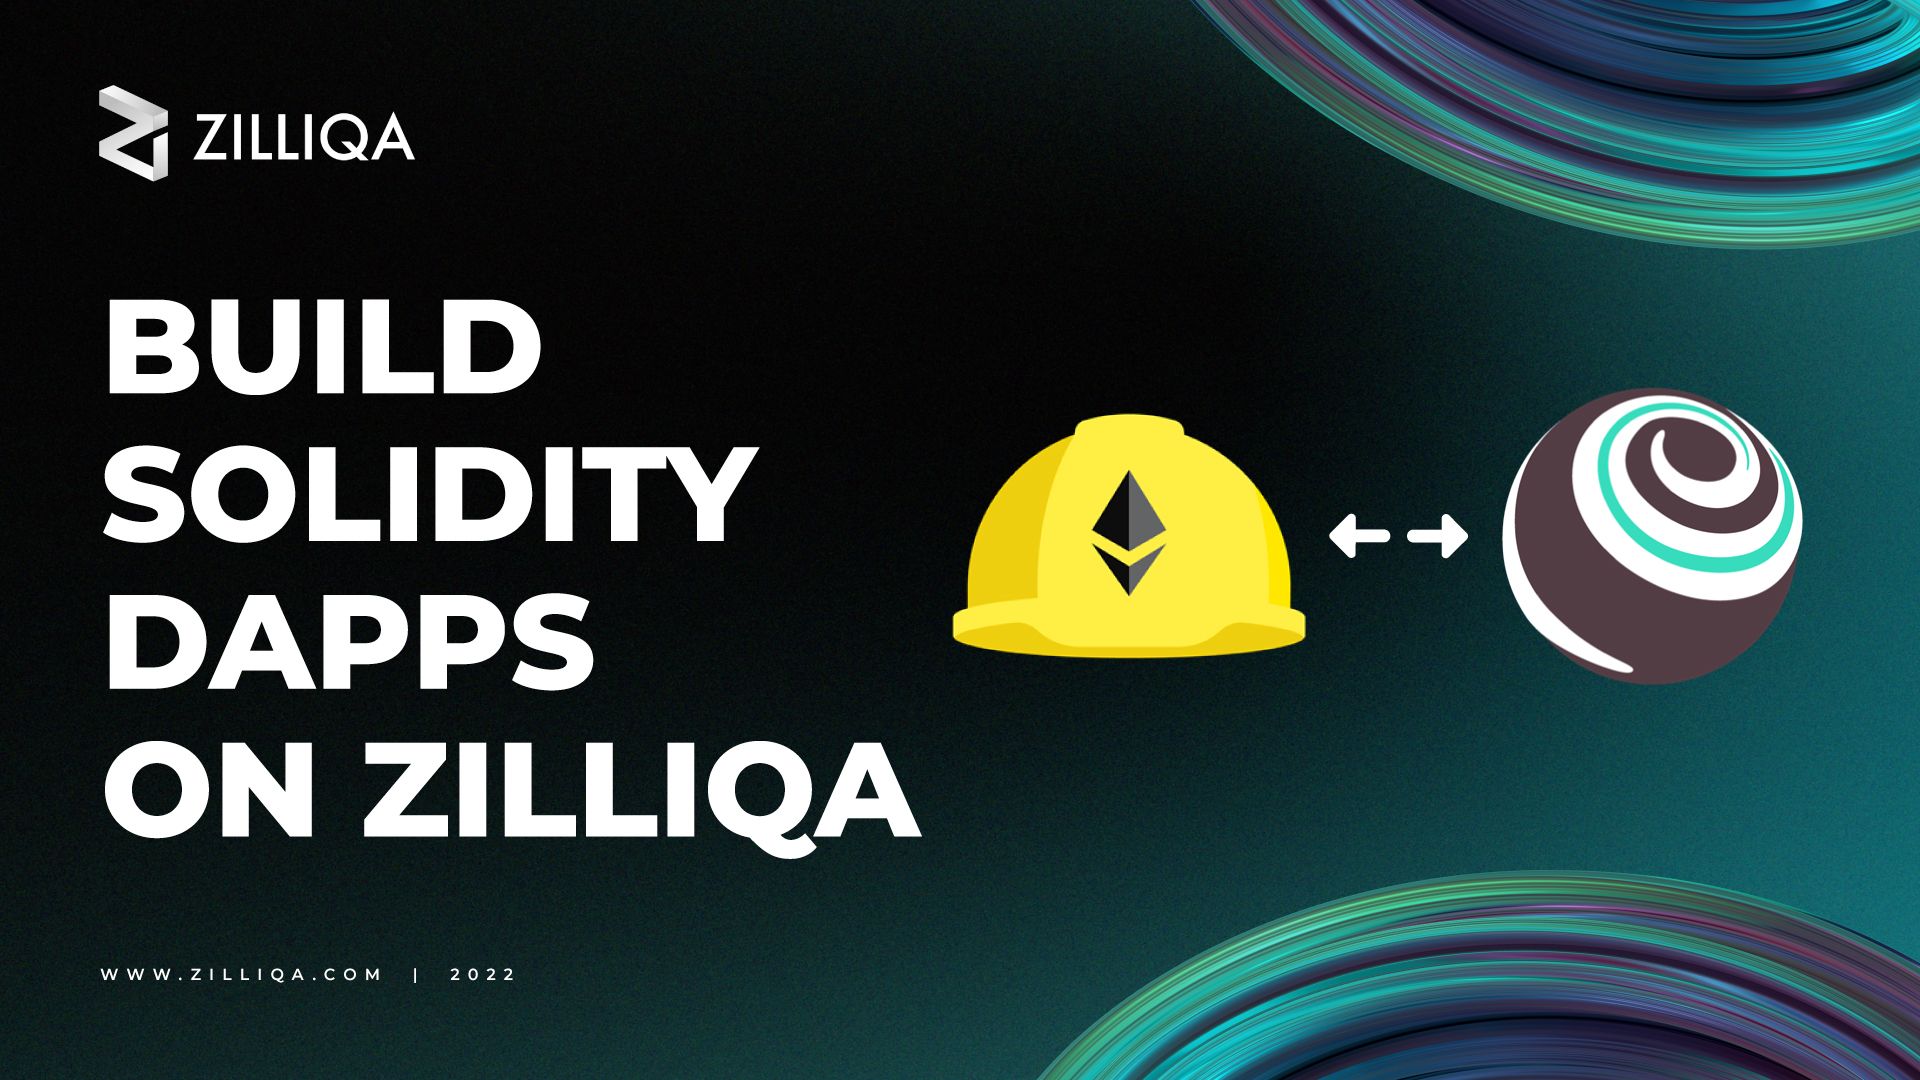 Deploy Solidity contracts on Zilliqa using Truffle and Hardhat